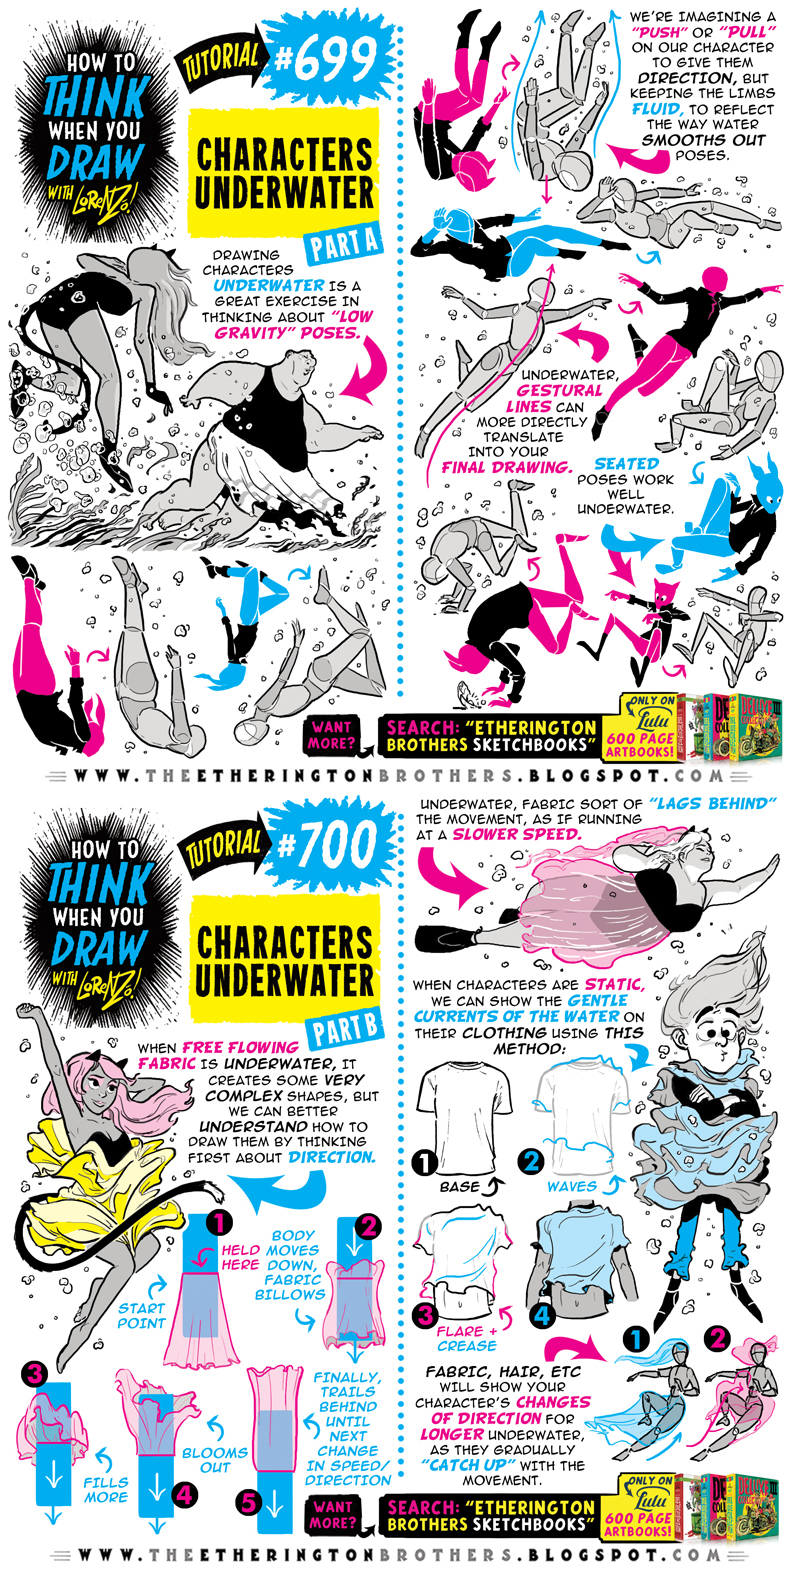 How to THINK when you draw CHARACTERS UNDERWATER! by EtheringtonBrothers on  DeviantArt